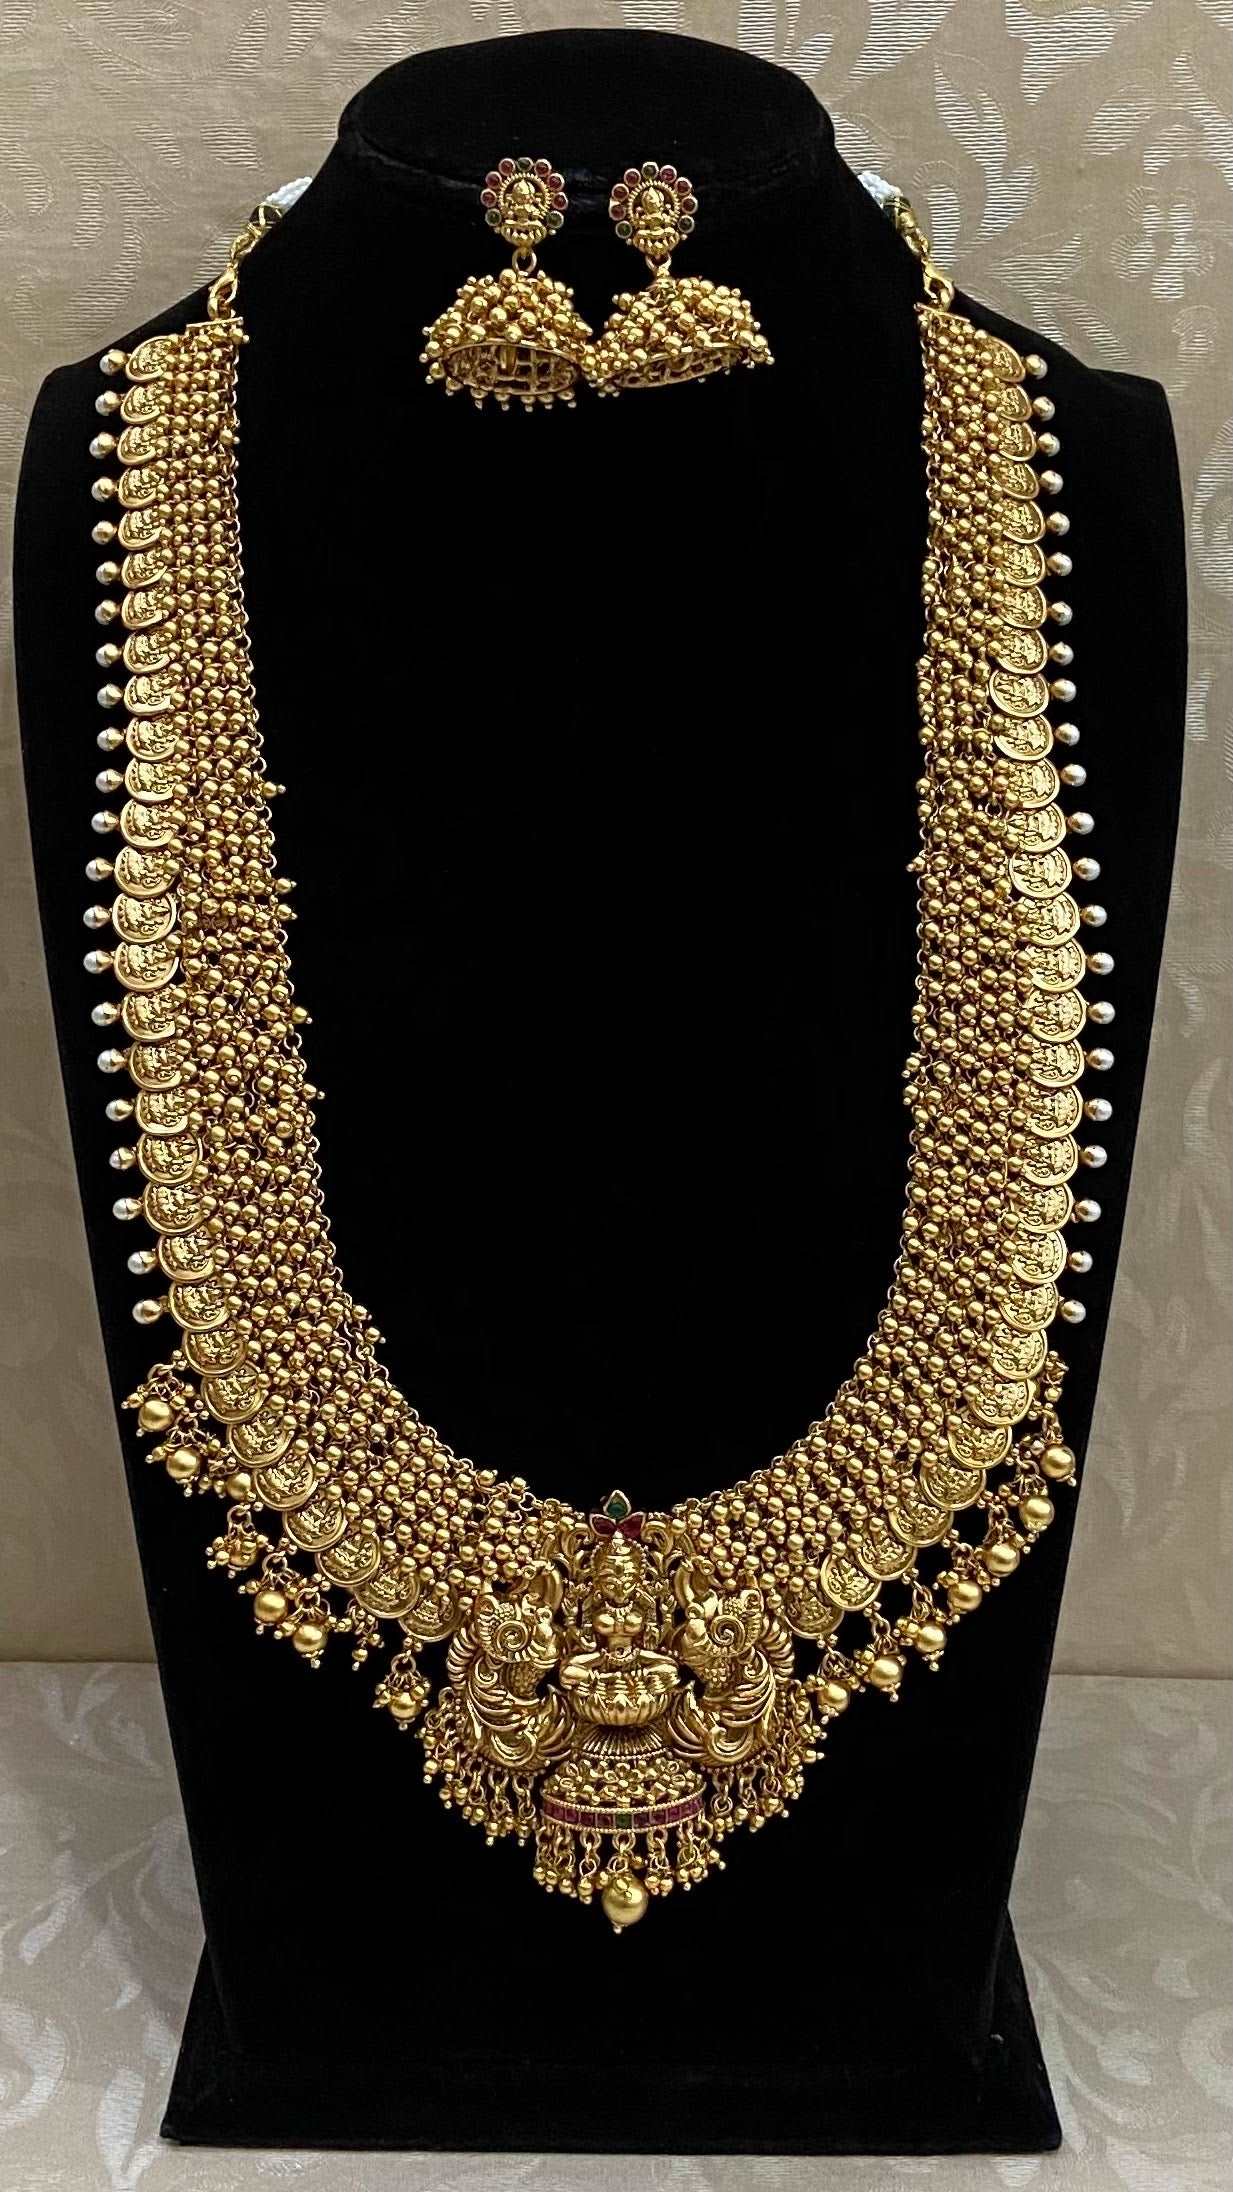 Grand temple necklace